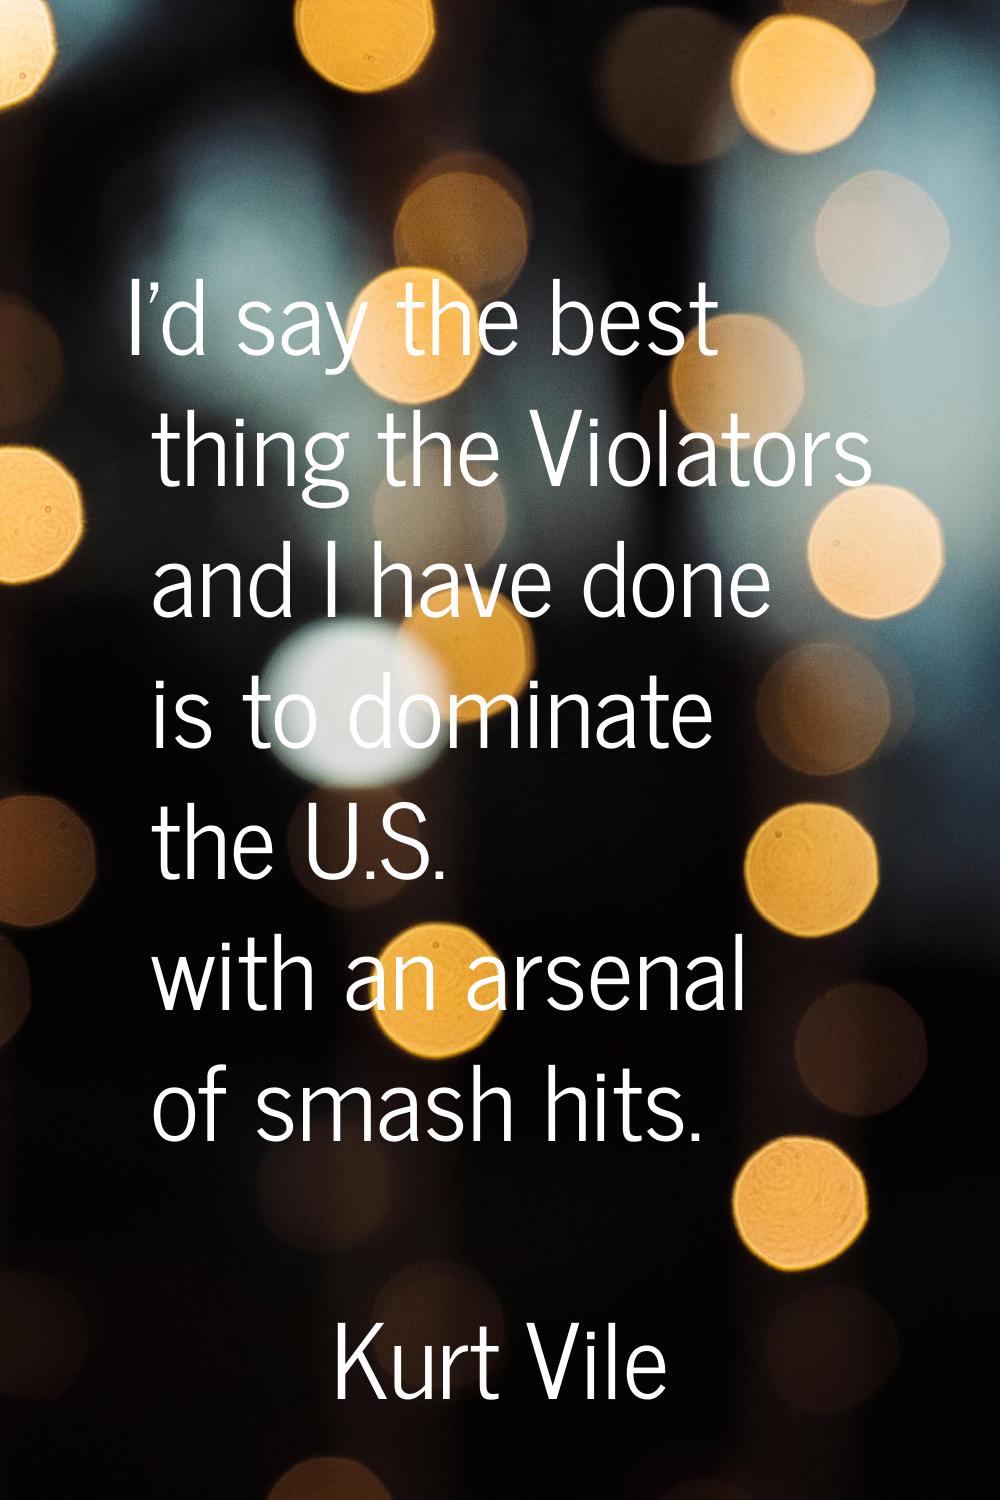 I'd say the best thing the Violators and I have done is to dominate the U.S. with an arsenal of sma